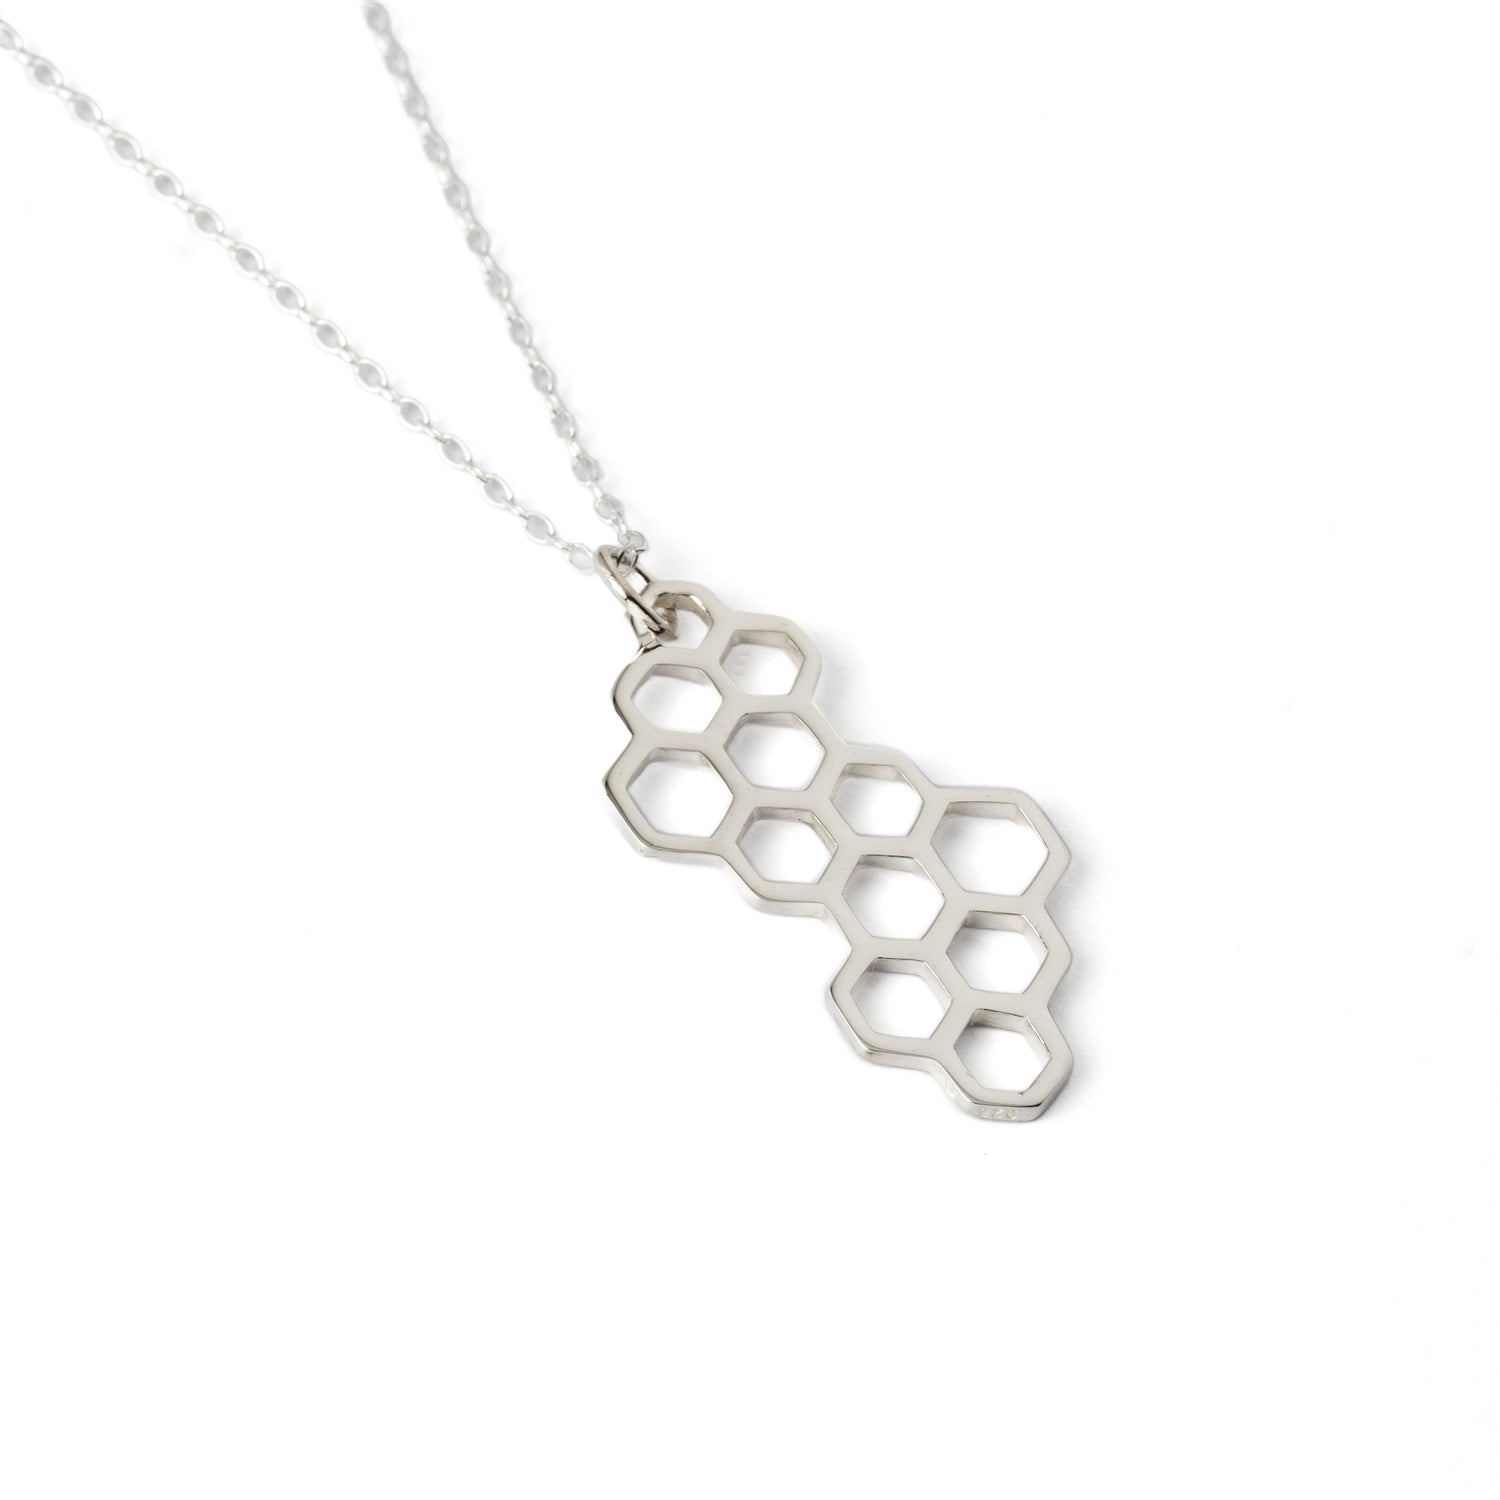 Honeycomb silver pendant necklace left side view